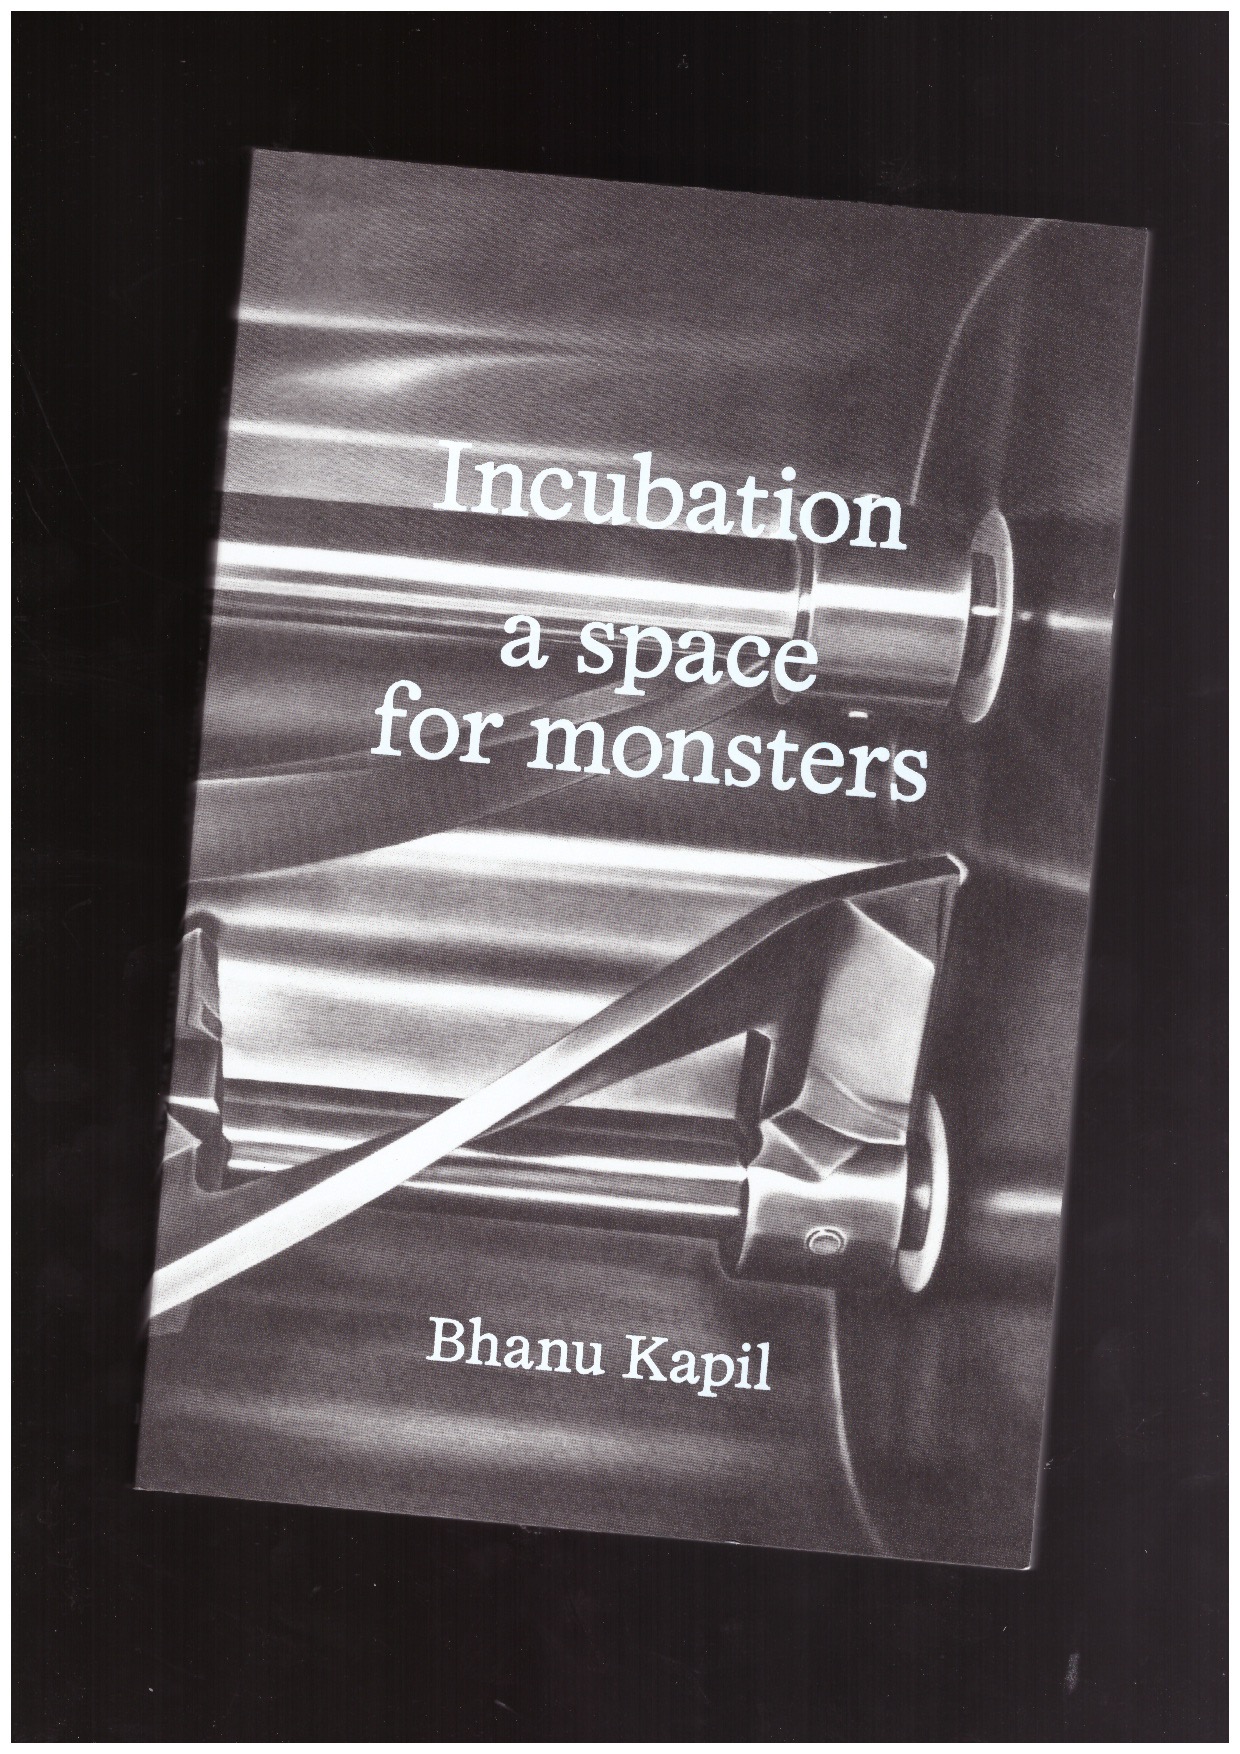 KAPIL, Bhanu - Incubation: a space for monsters